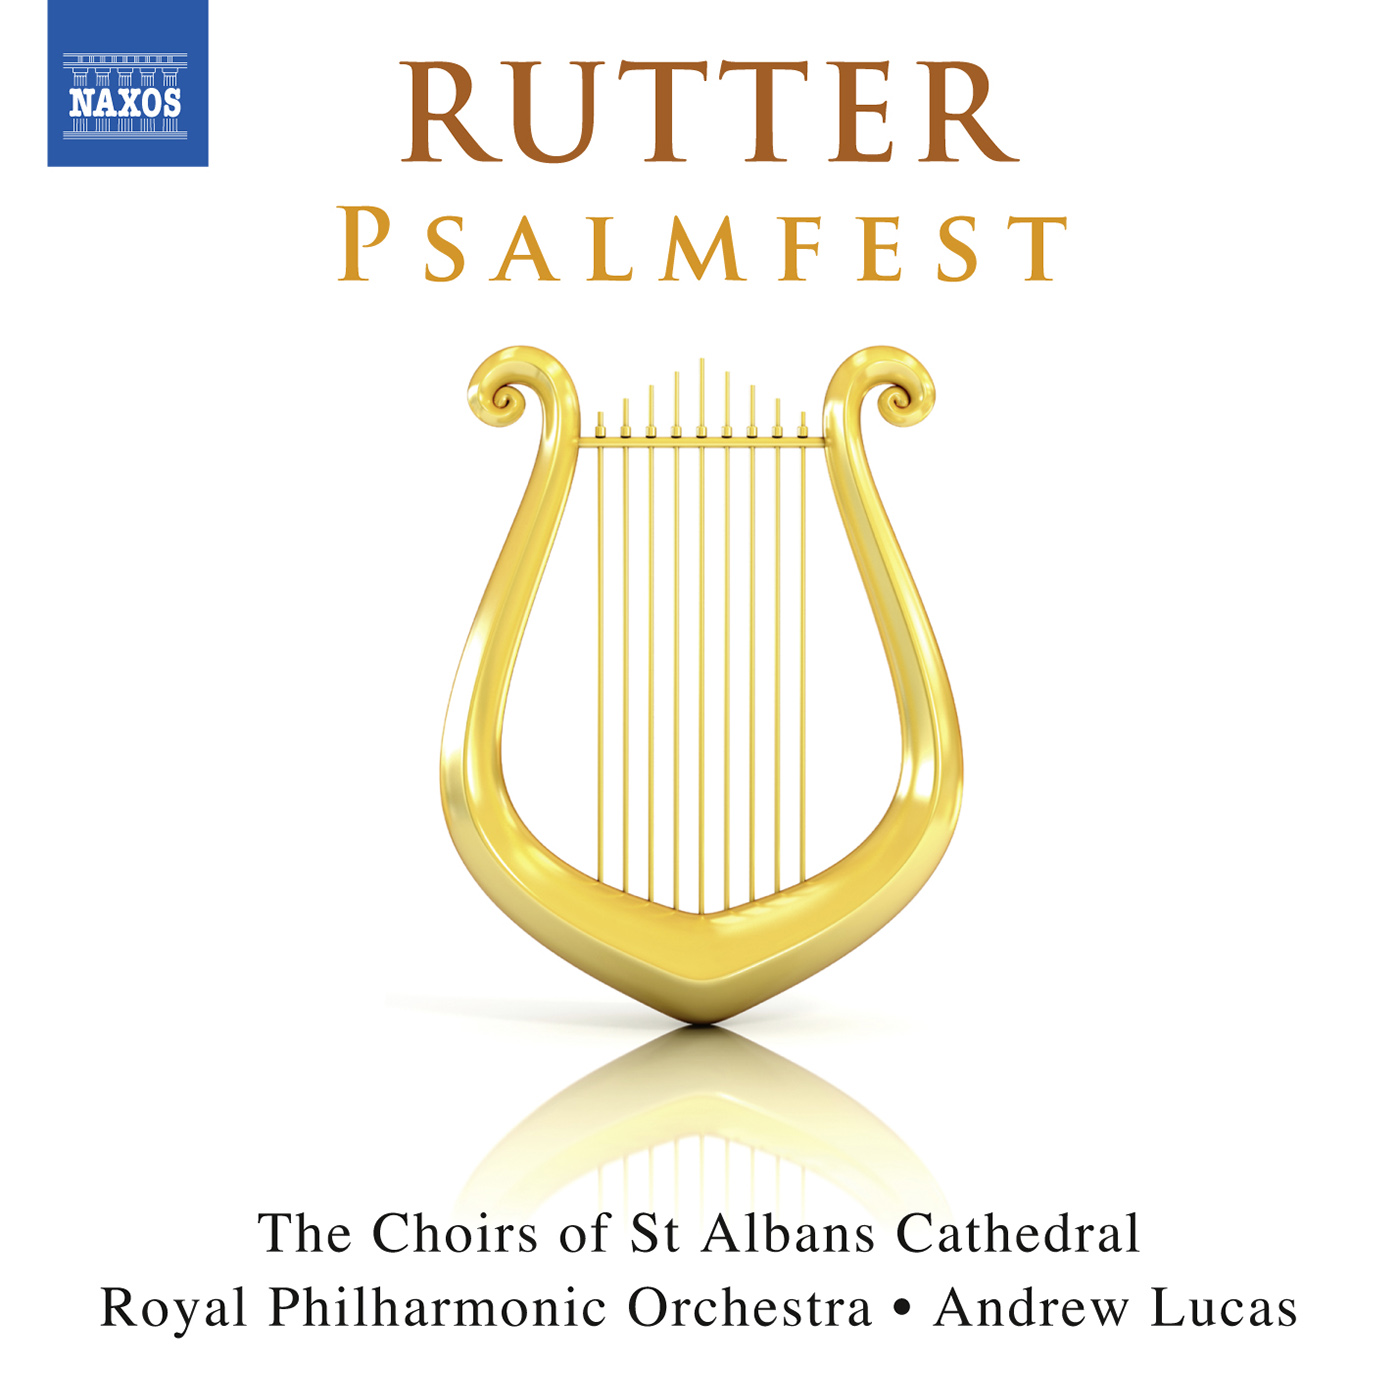 RUTTER, J.: Psalmfest / This is the Day / Lord, Thou hast been our refuge / Psalm 150 (St Albans Cathedral Choirs, Royal Philharmonic, A. Lucas)